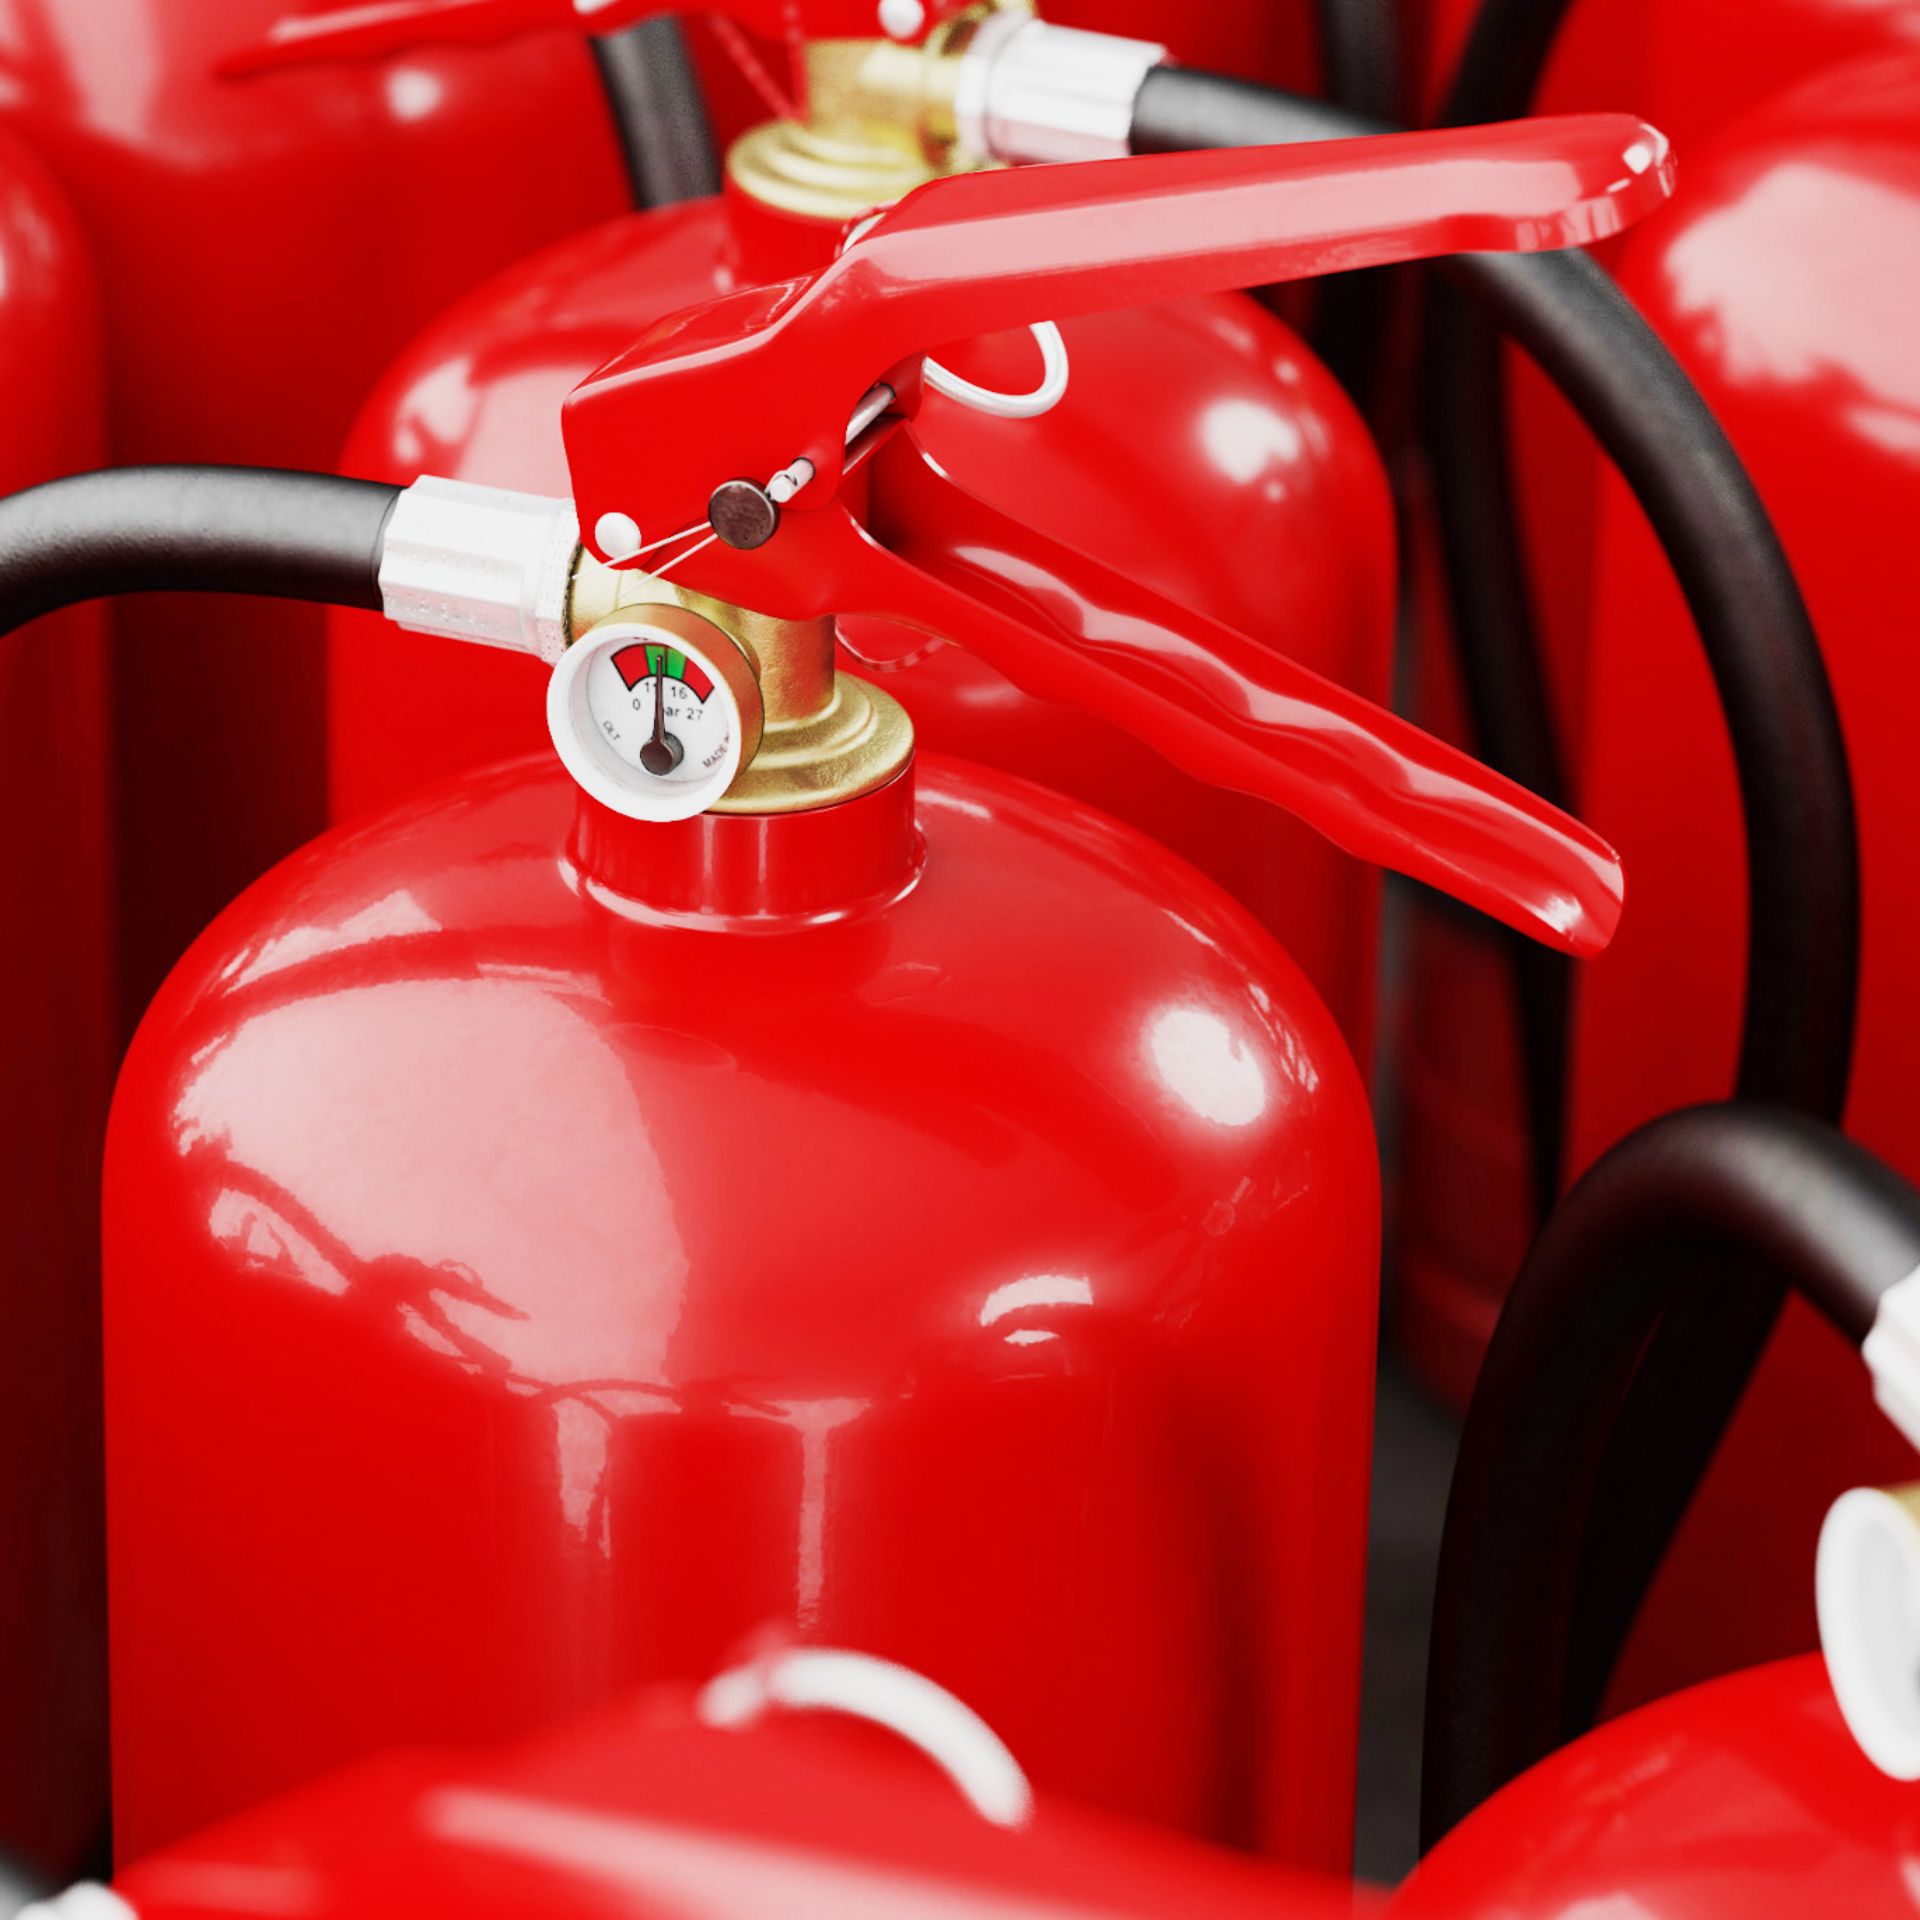 What Extinguisher Should I Use? - Fire Safety & Protection Services  Hertfordshire. Call 01582 469000 today